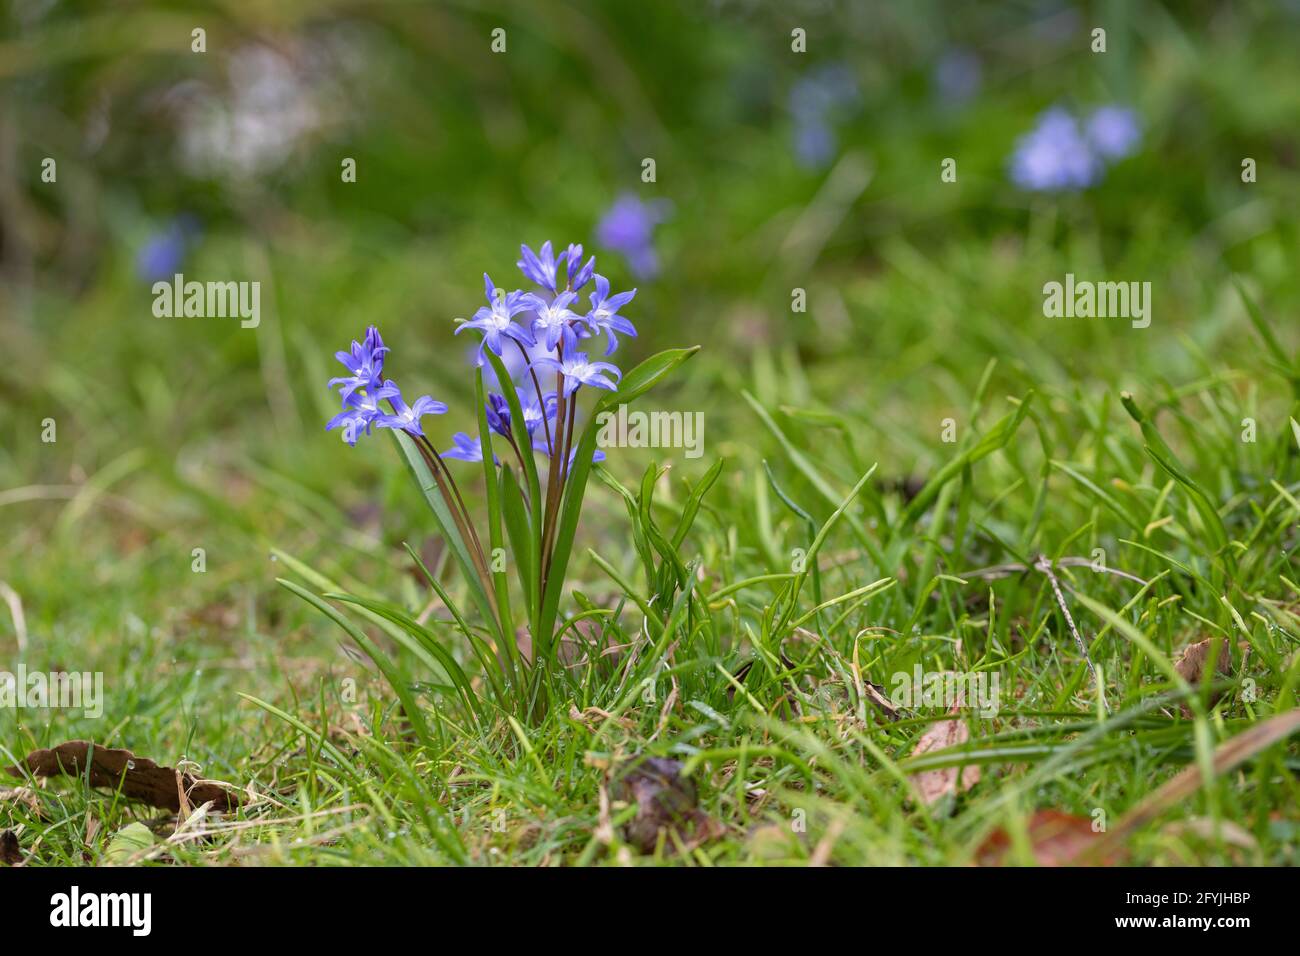 Close up of Chionodoxa lucilae flowering in the grass in a spring garden in the UK Stock Photo